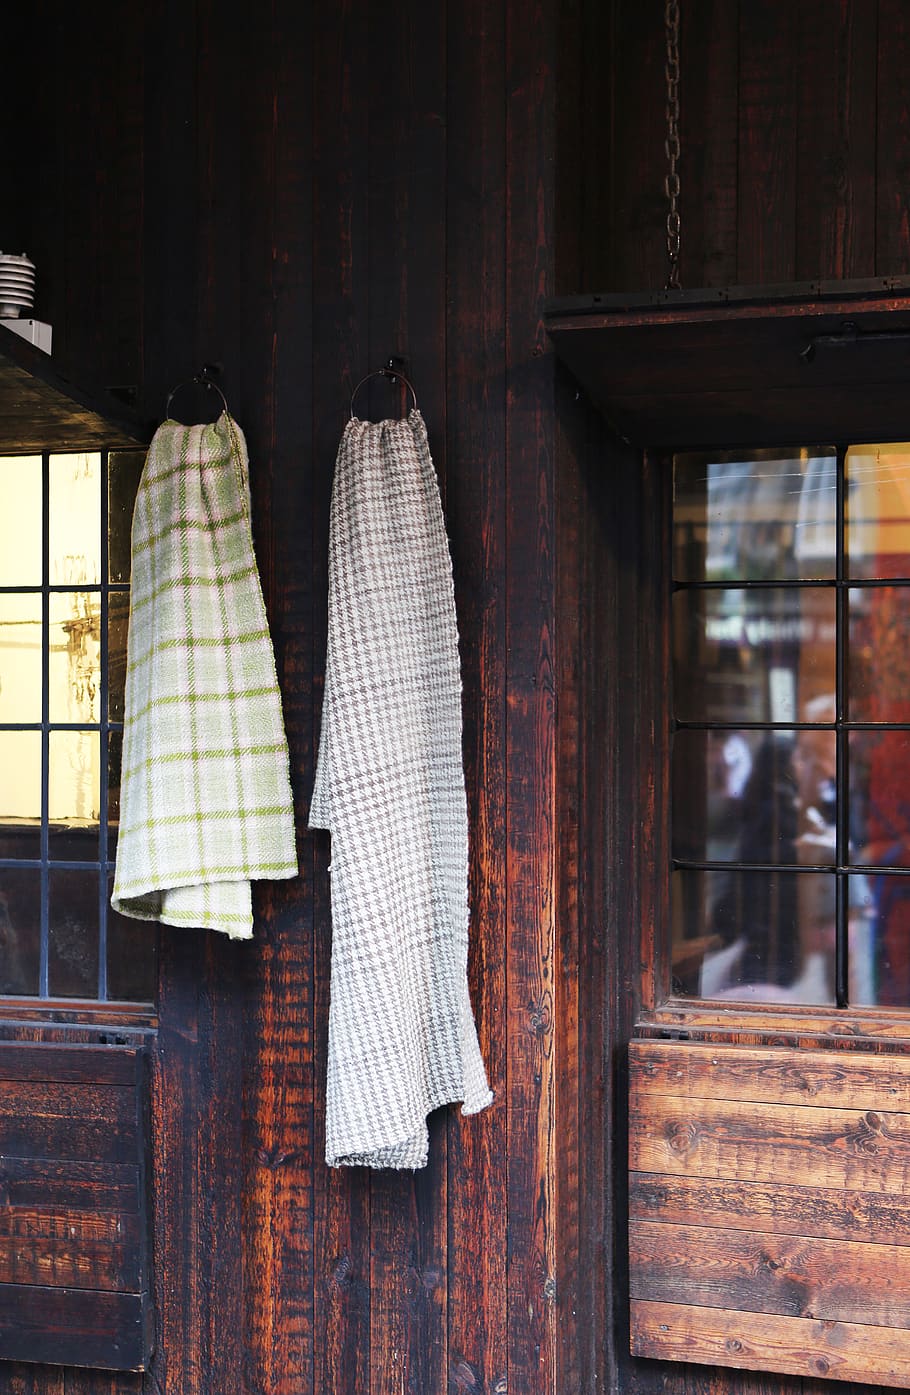 towels, wood, house, window, hanging, wood - material, day, indoors, built structure, architecture